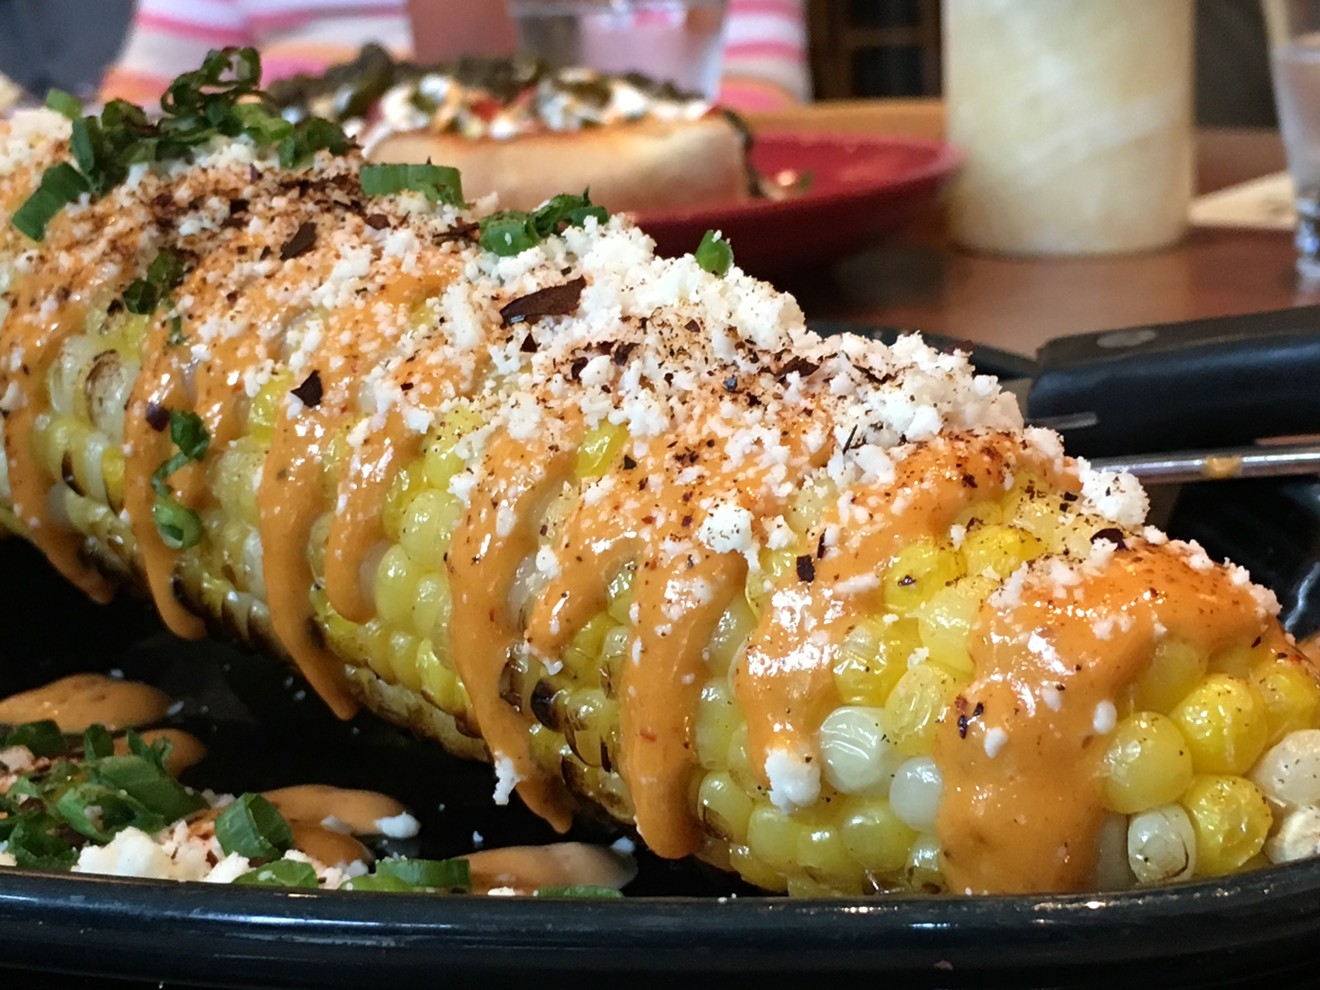 Grilled sweet corn at Sol Cocina.